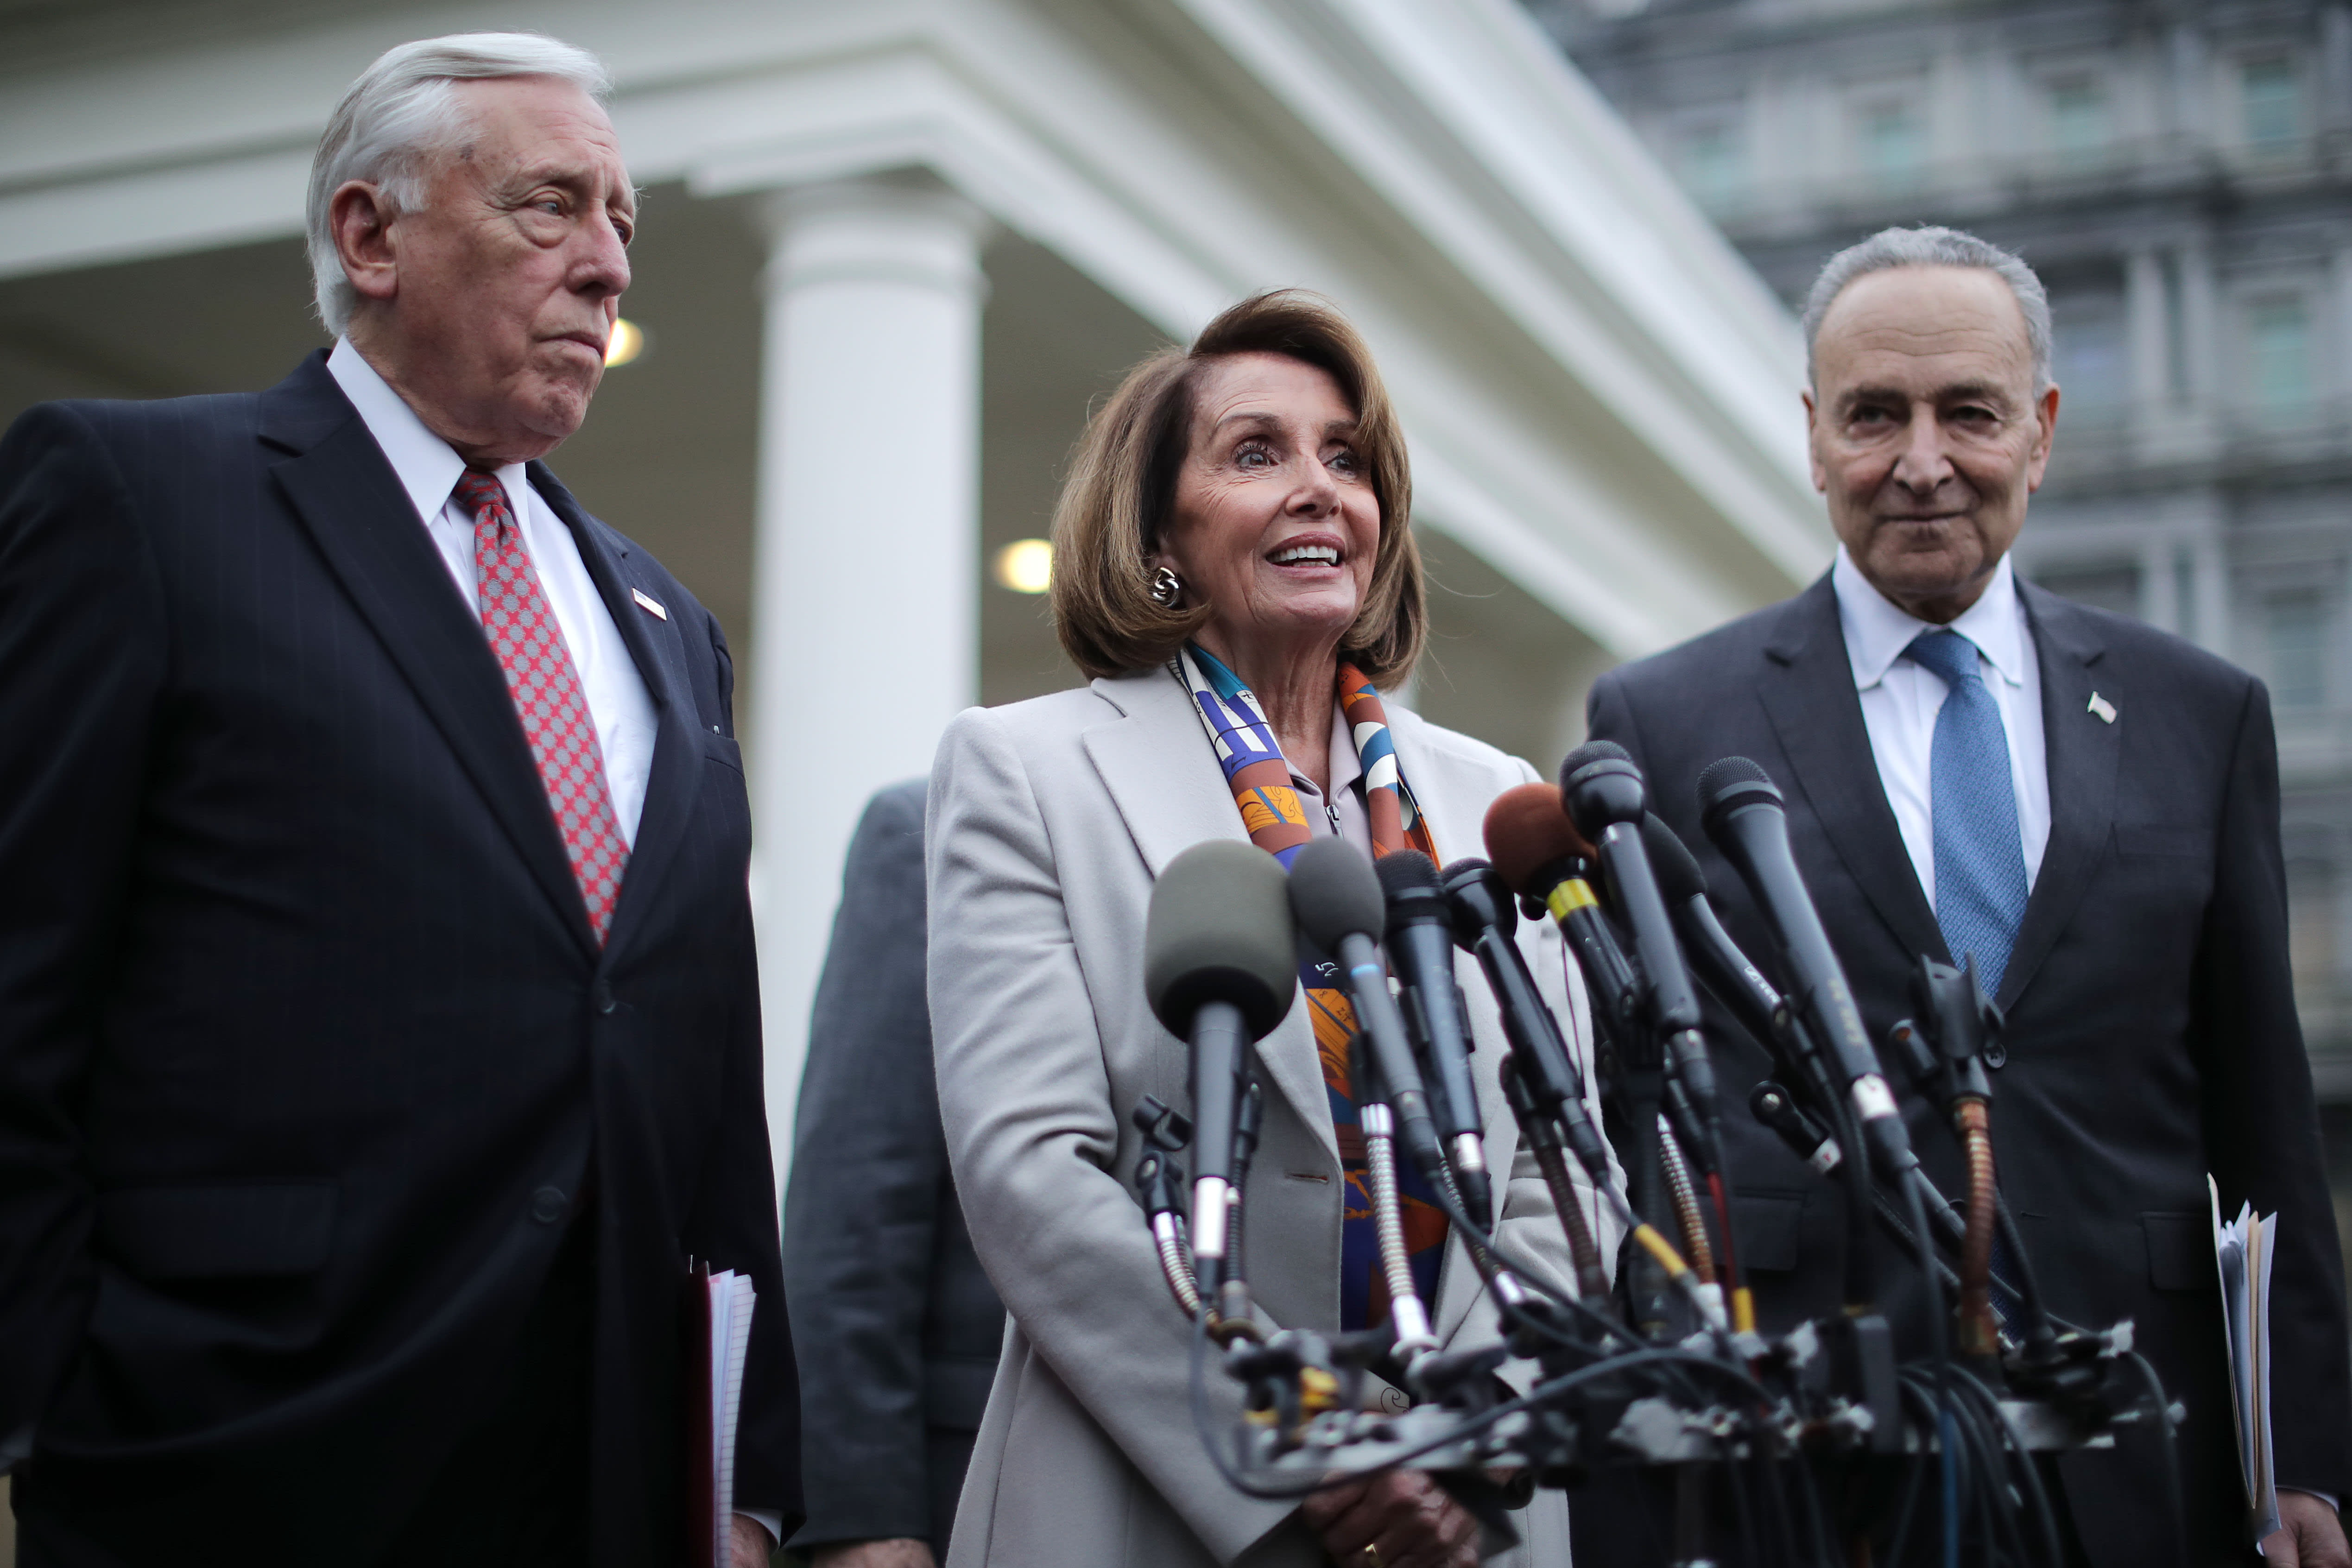 Top Democrats aim to strike a deal on Biden’s social spending plan within hours – CNBC